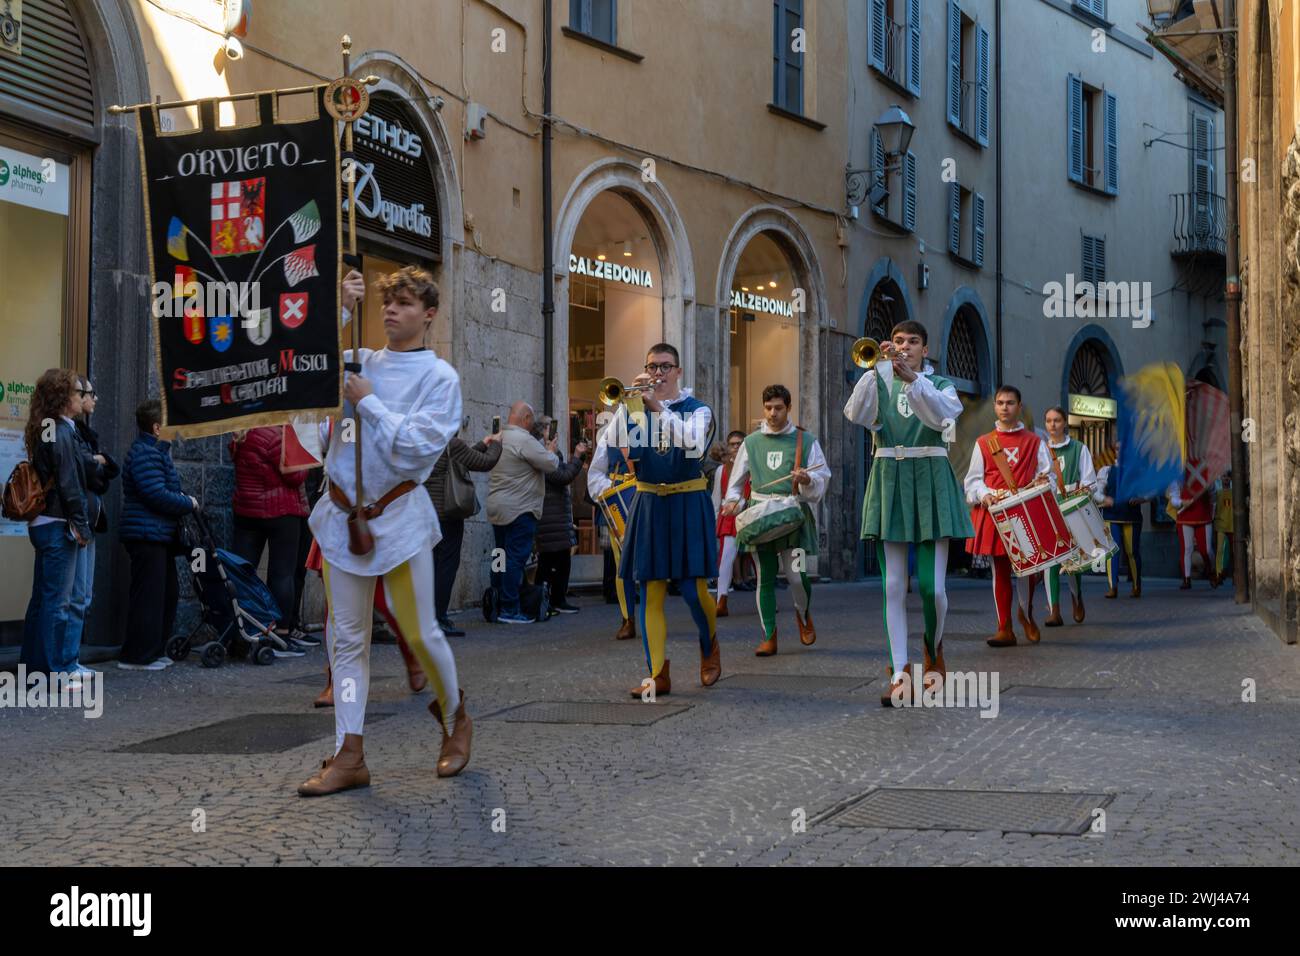 Marching band dressed in medieval clothes marching through the streets of old town Orvieto Stock Photo